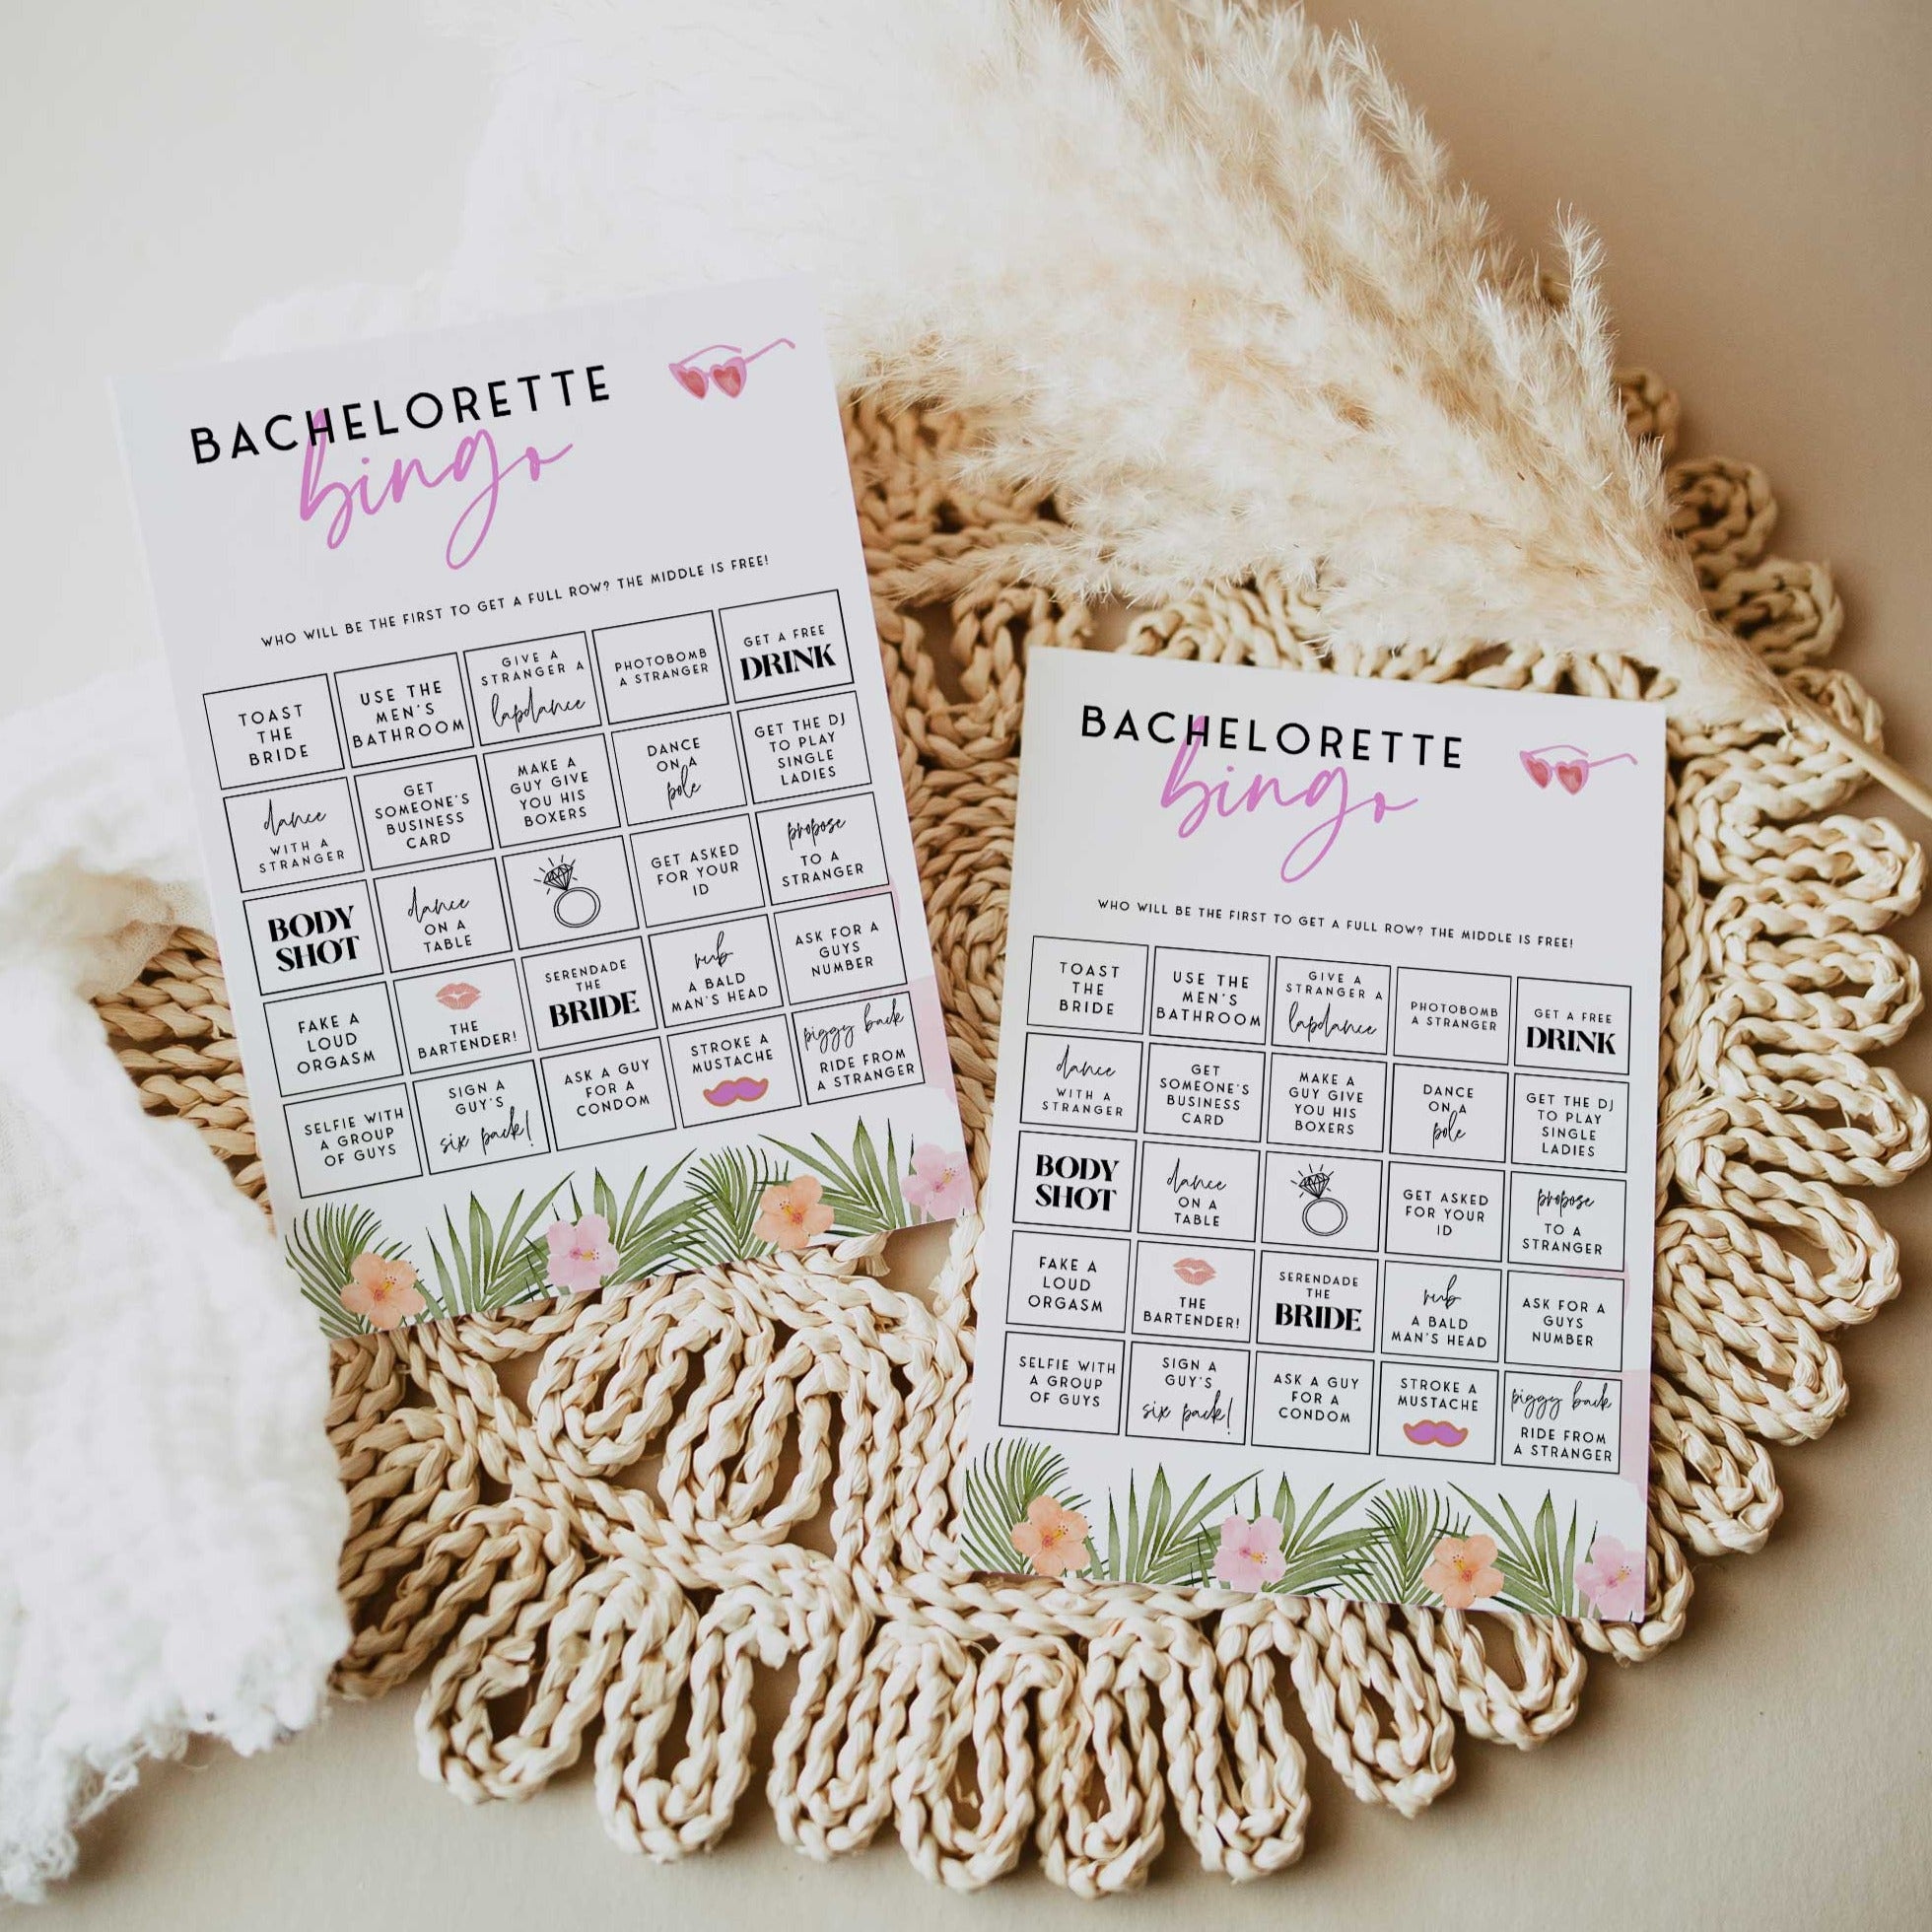 Fully editable and printable adult bachelorette party bingo game with a miami design. Perfect for a miami, Bachelorette themed party